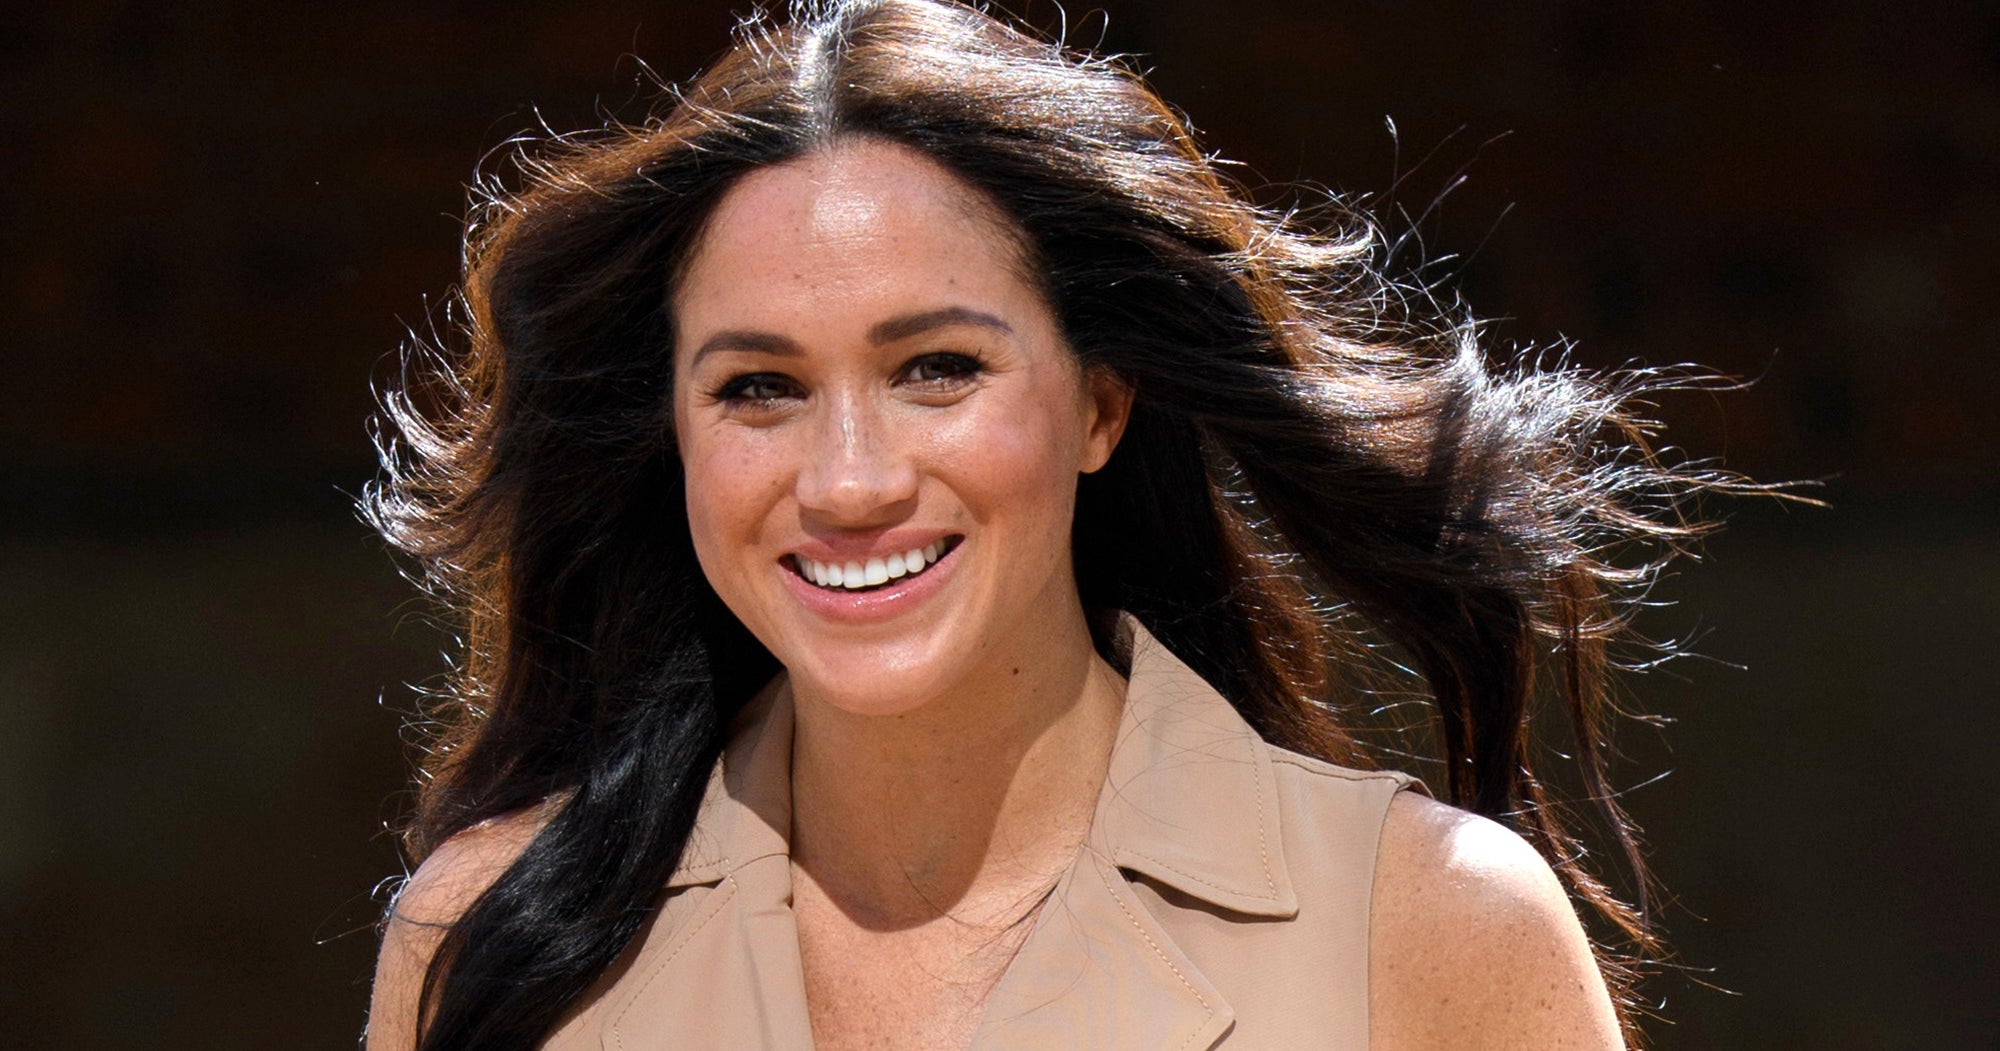 Commentator Says Kate Middleton Isn't Going to Give Meghan Markle 'Time ...